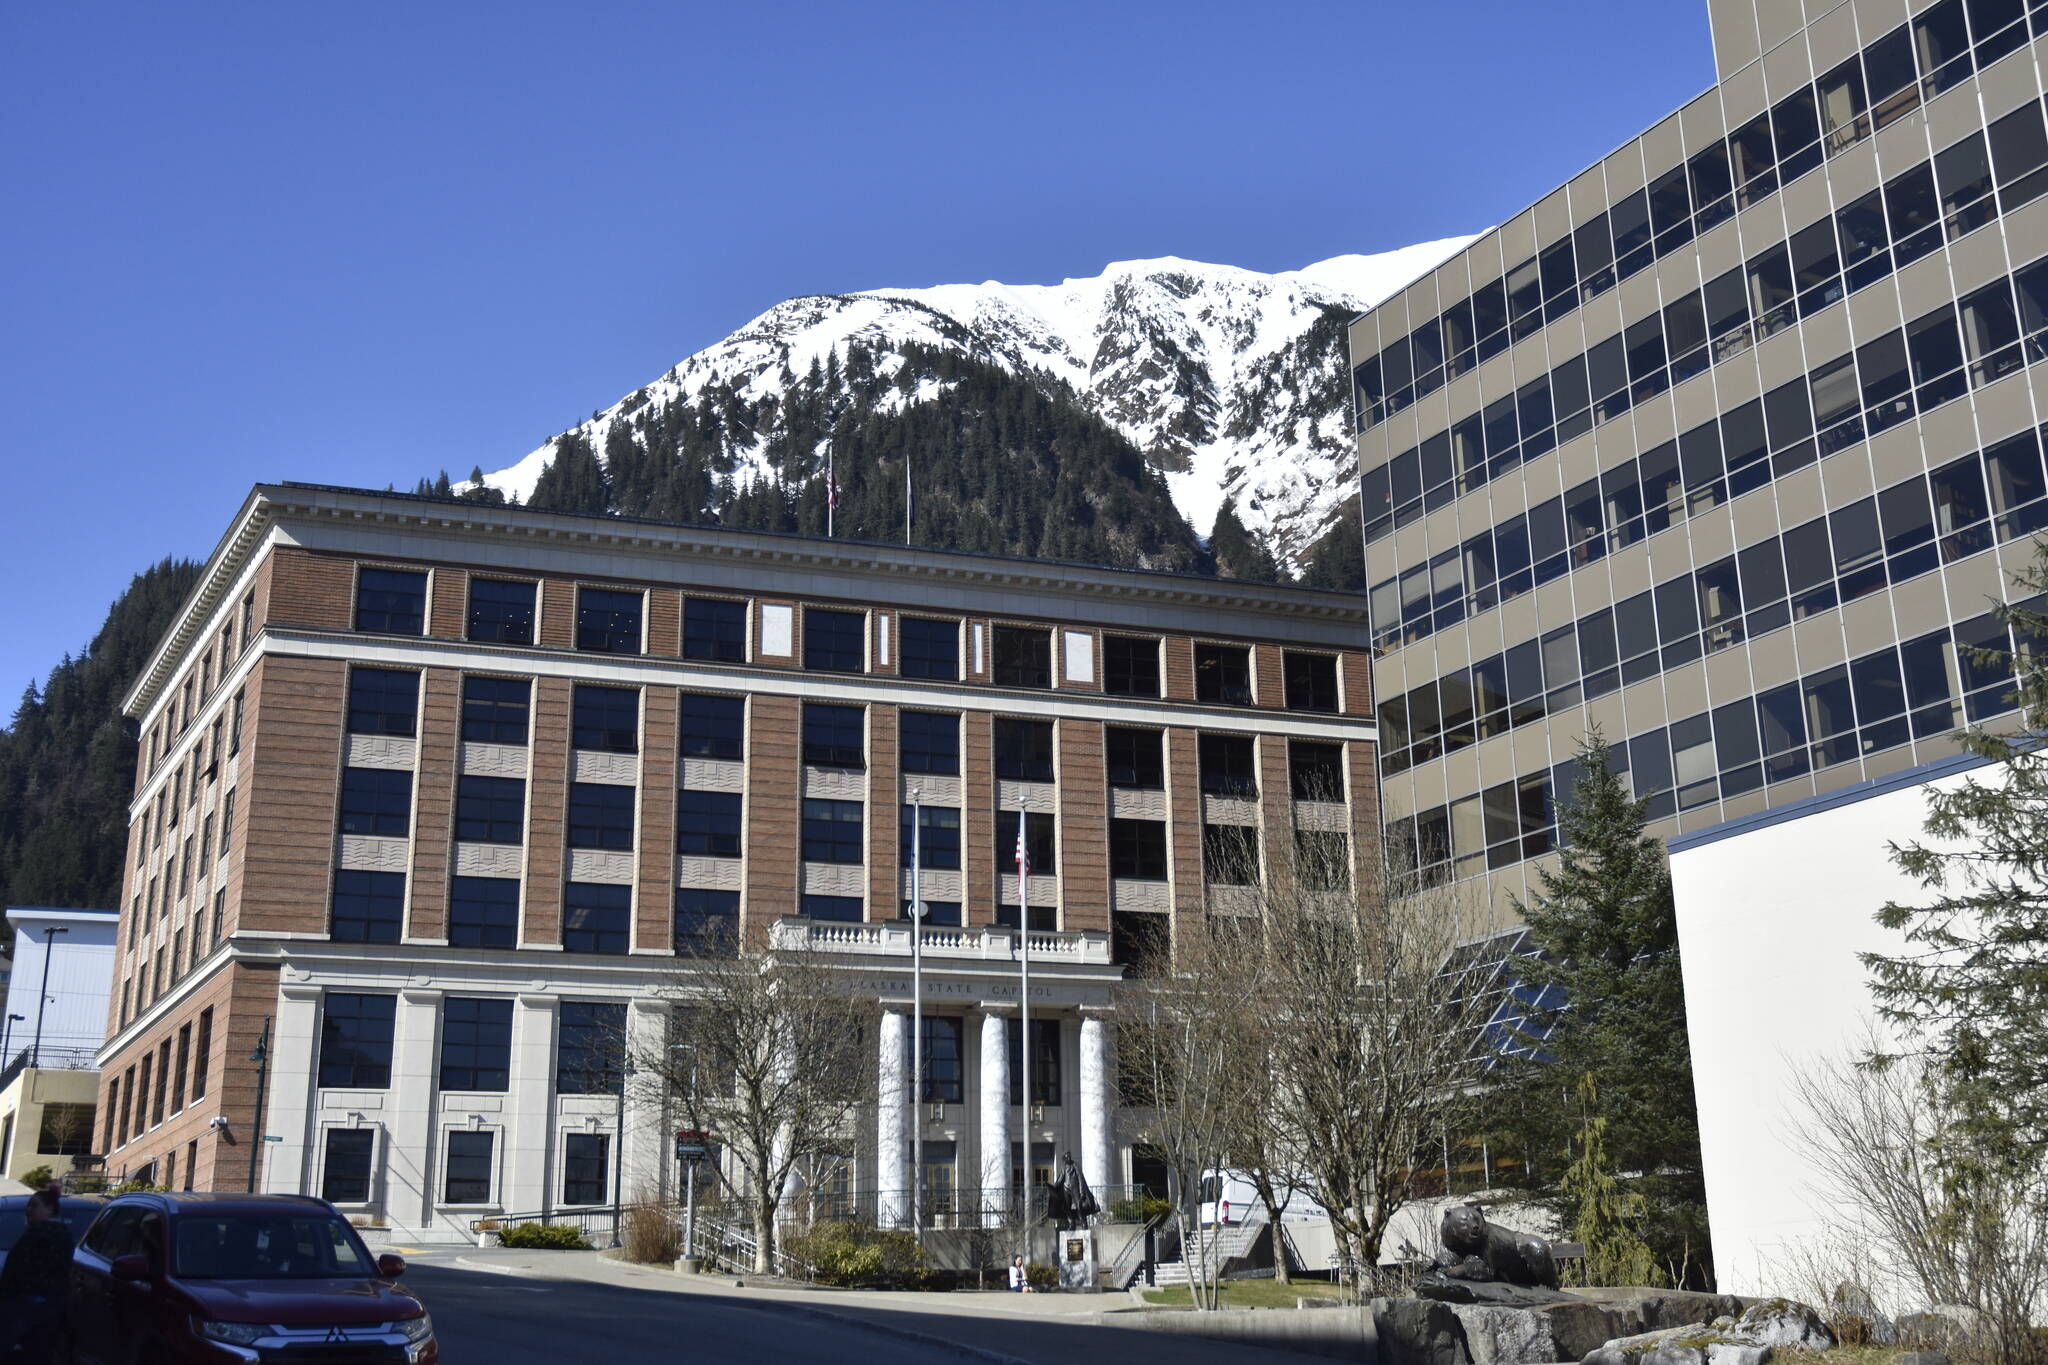 The Alaska House of Representatives passed a bill reducing sentences for and clearing records for marijuana possession on Wednesday, April 20, 2022, a day adopted as an unofficial holiday by cannabis users. The maker of the bill said the timing was no intended. (Peter Segall / Juneau Empire)